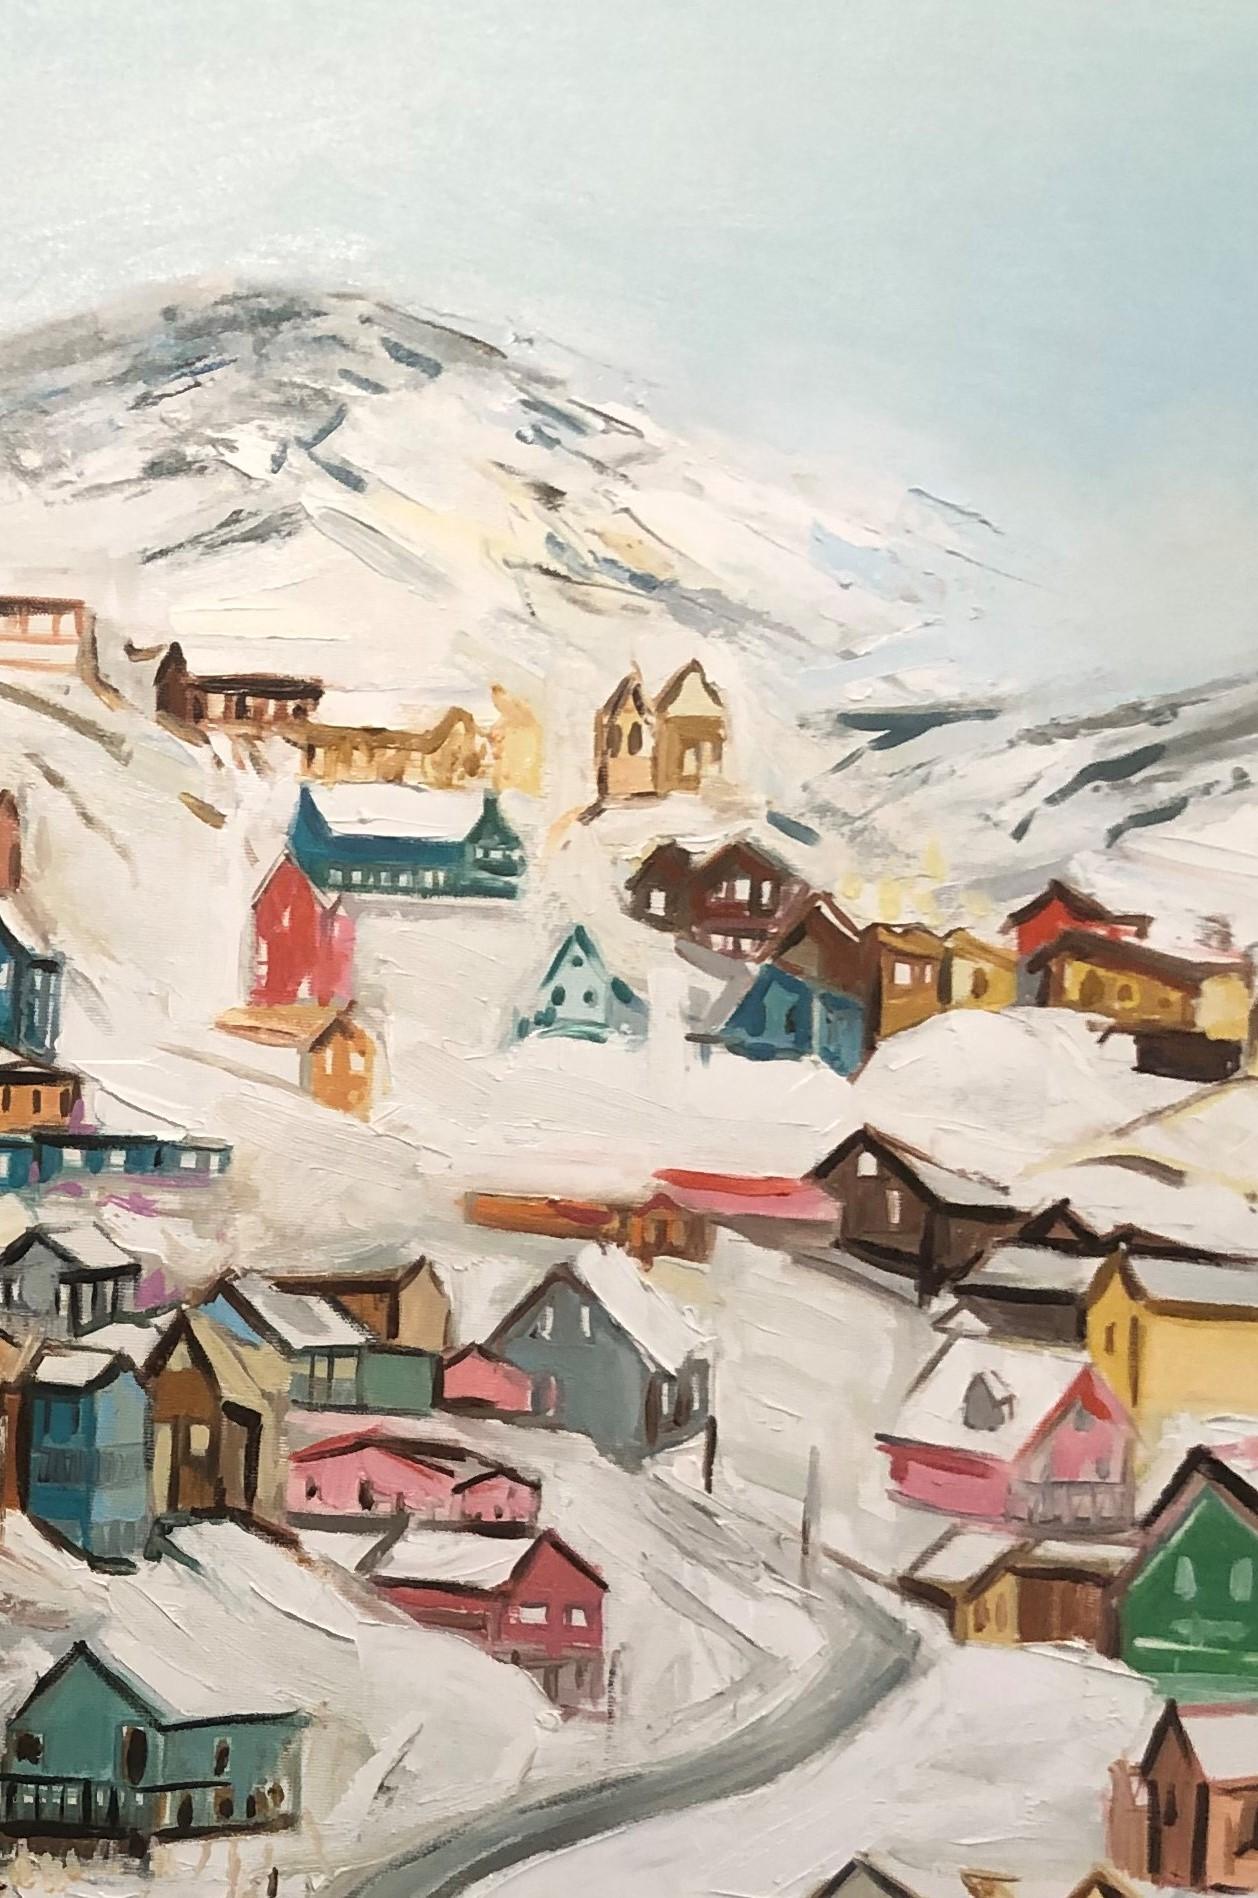 Colored houses,miniature people in colored outfits, a mountain and lots of white snow compose the theme of this artwork. A snow resort with the style of Marina Koutsospyrou.
Oil on canvas,ready to hang! 